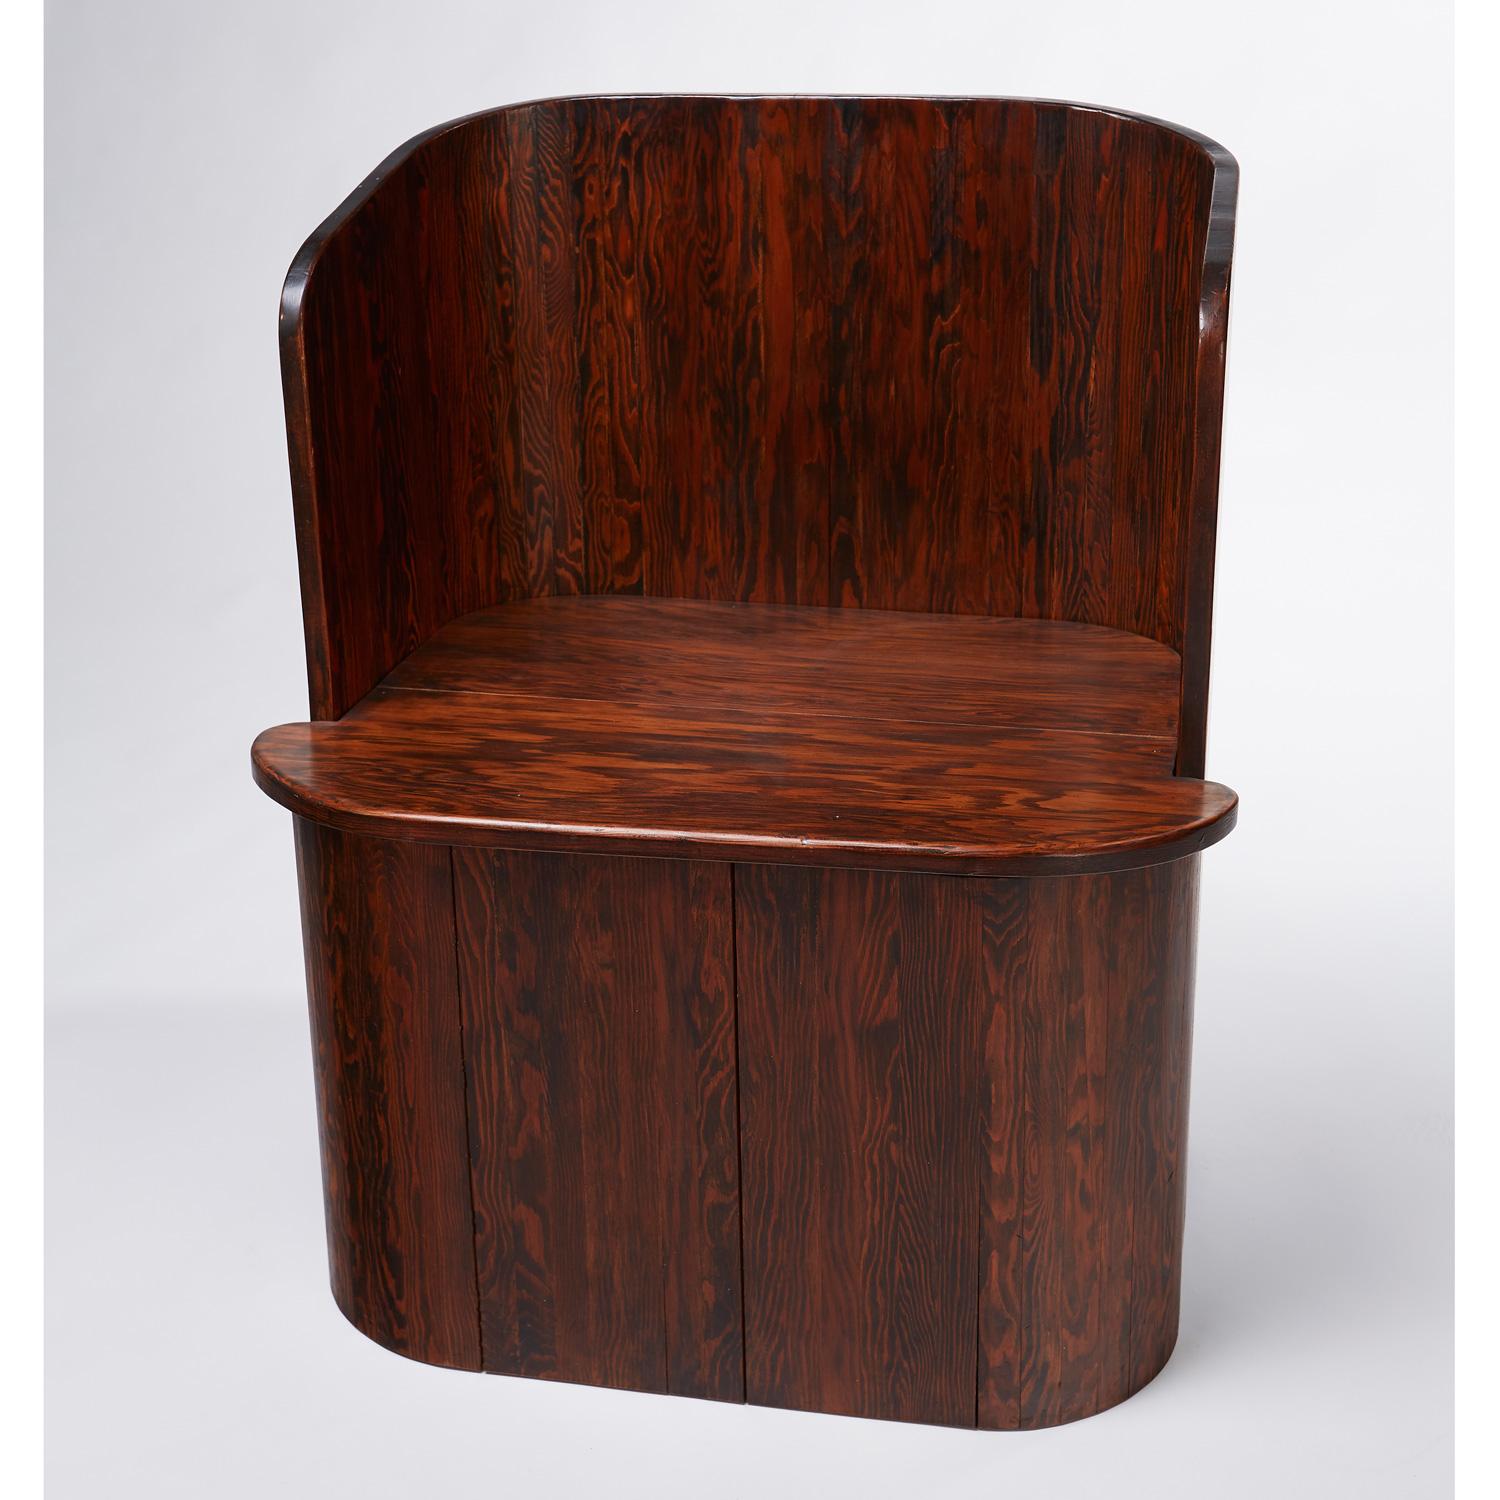 American Rosewood Stained Barrel Chair